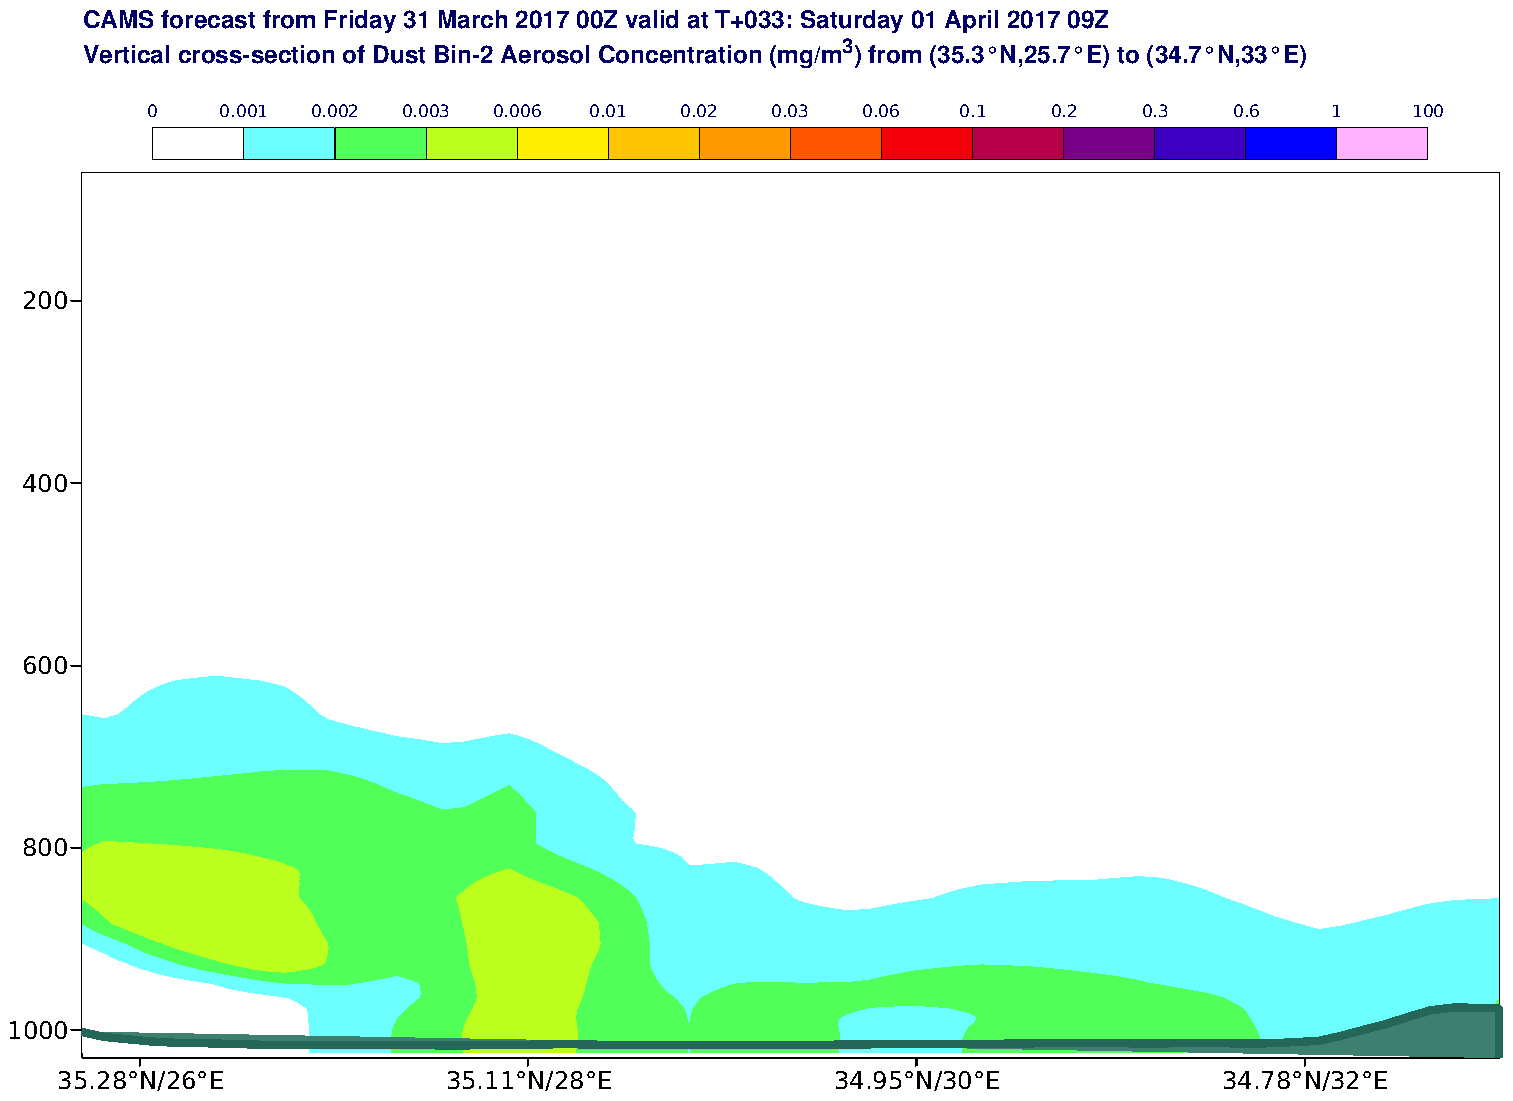 Vertical cross-section of Dust Bin-2 Aerosol Concentration (mg/m3) valid at T33 - 2017-04-01 09:00